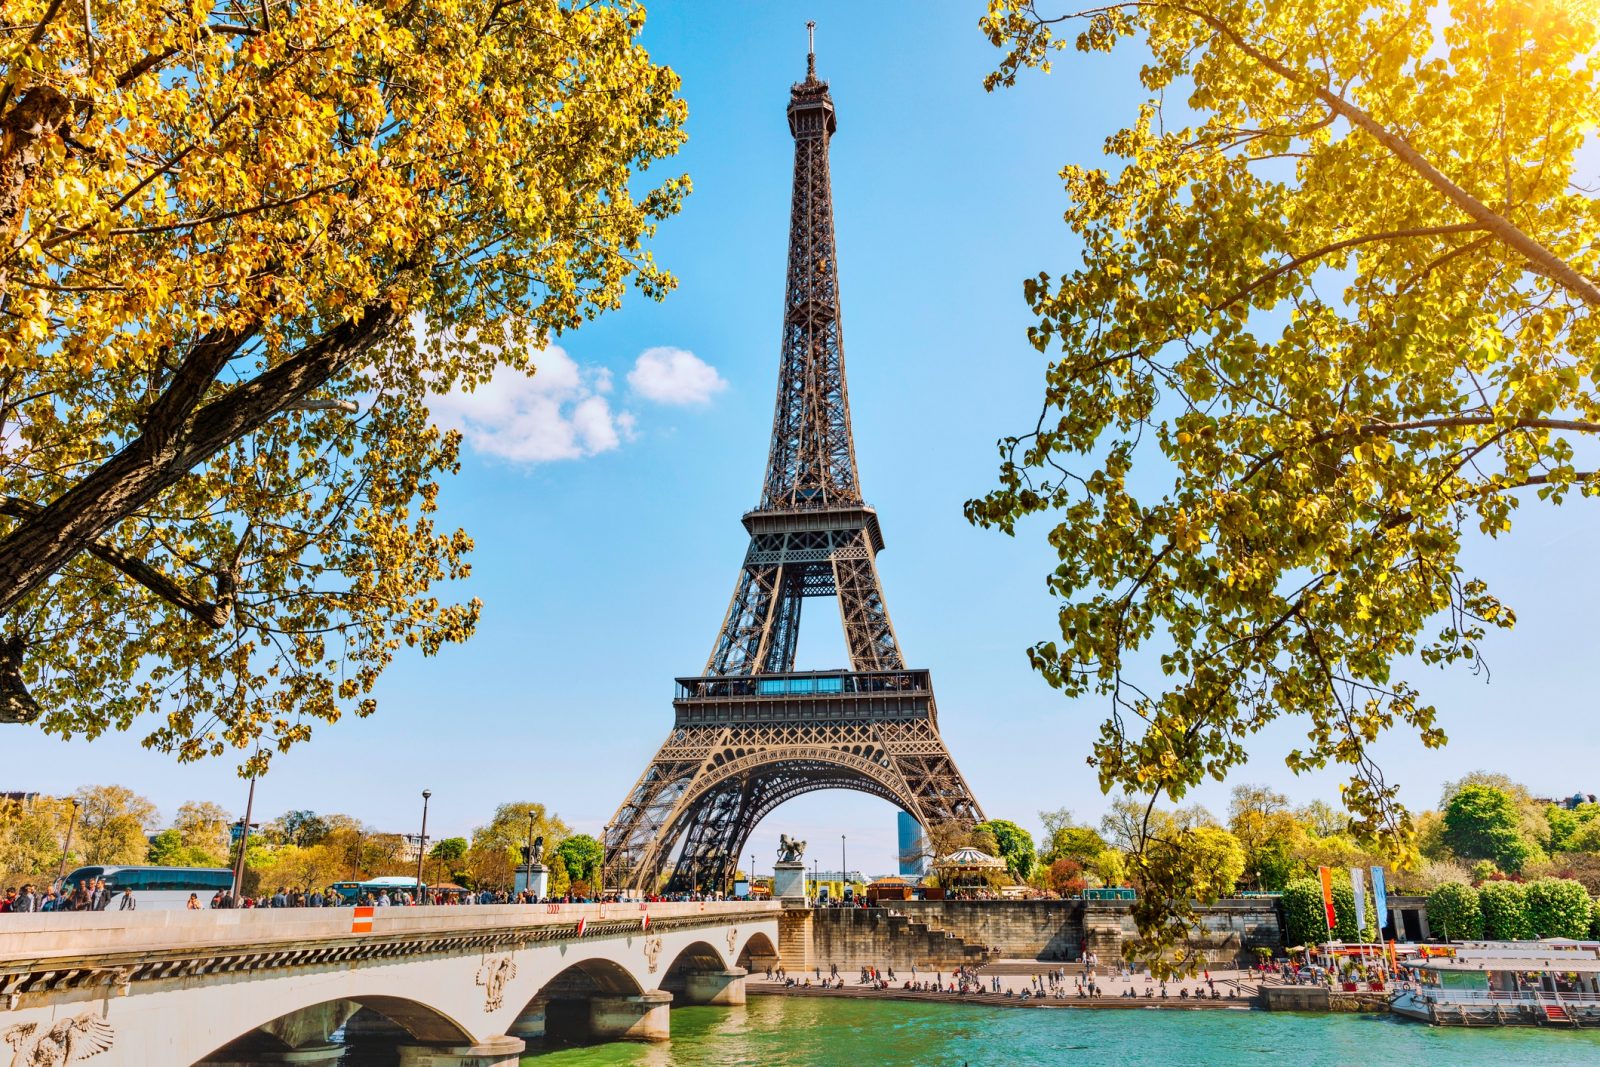 If You Can Get 100% On This 25-Question Mixed Knowledge Test, Your Intelligence Leaves Me Speechless Eiffel Tower, Paris, France